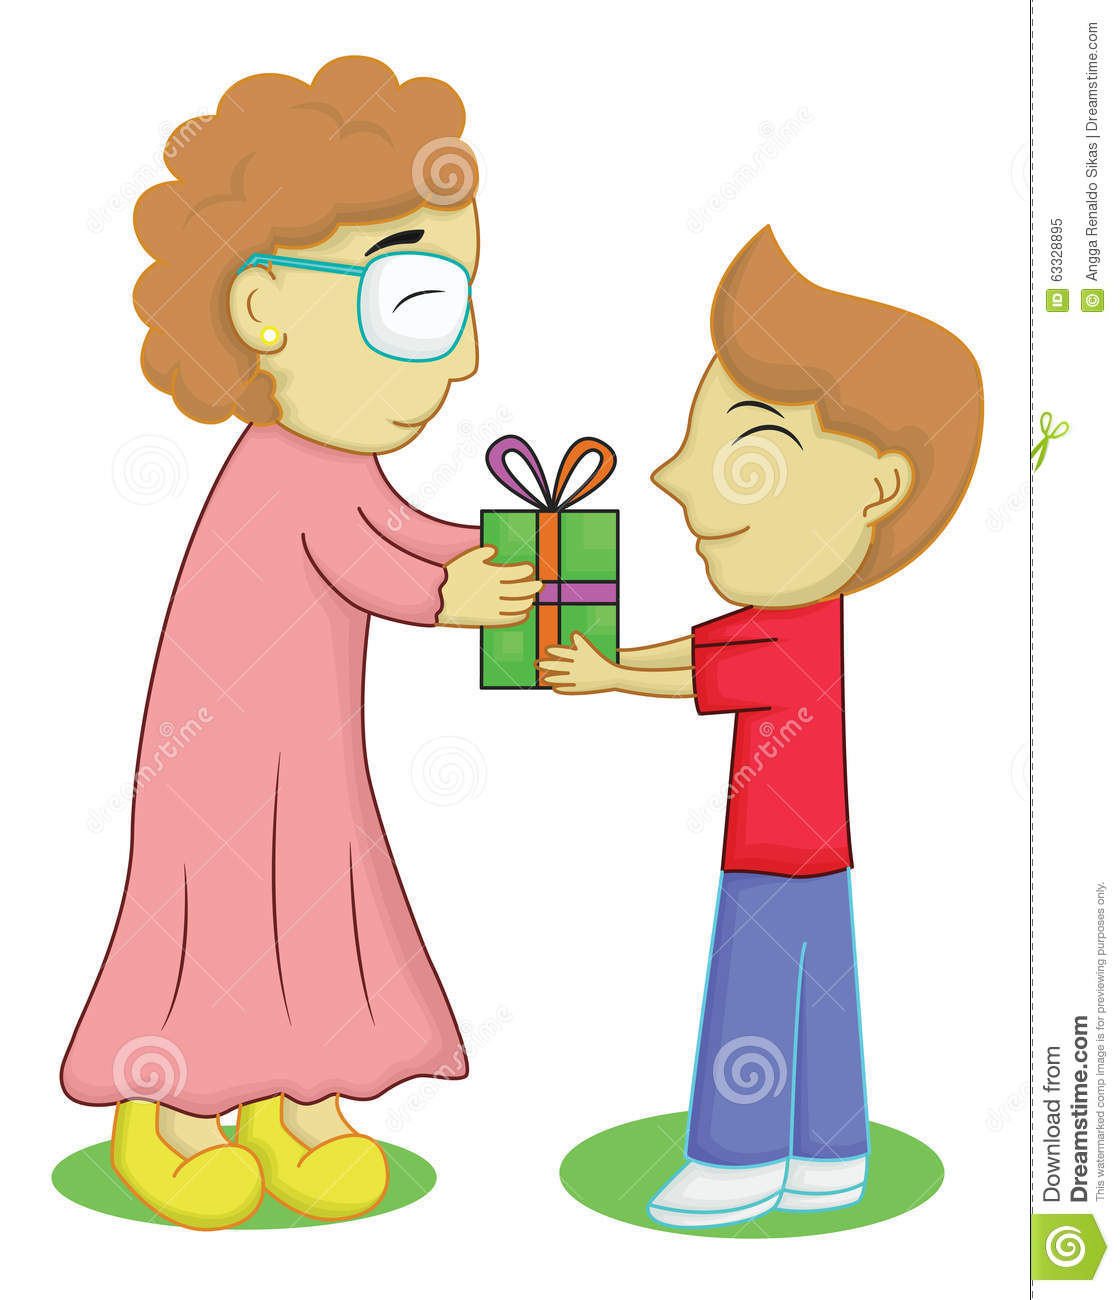 Giving gift clipart 4 » Clipart Station.